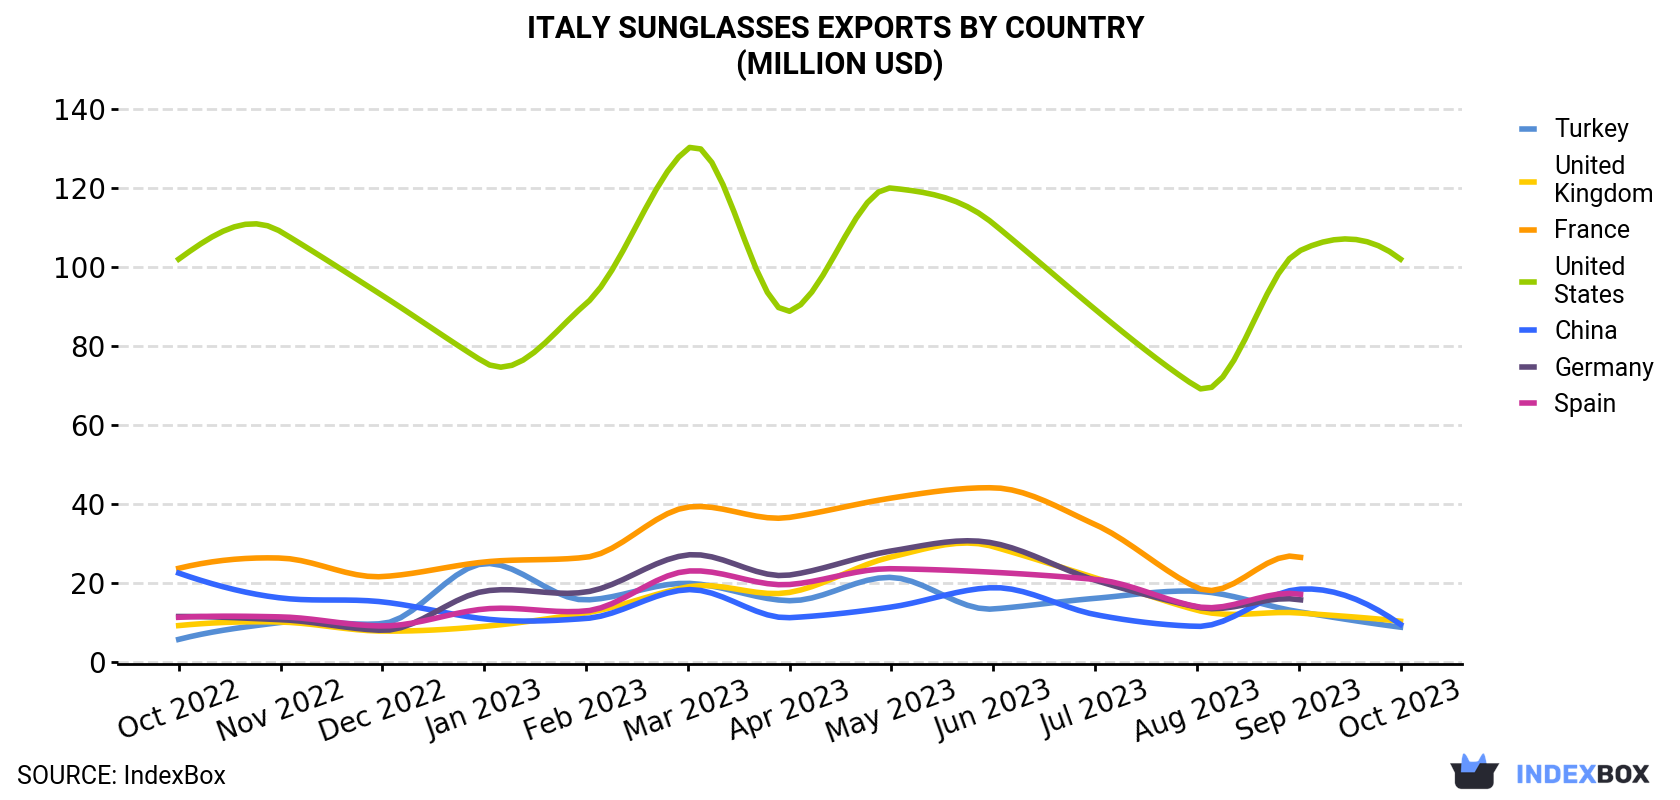 Italy Sunglasses Exports By Country (Million USD)